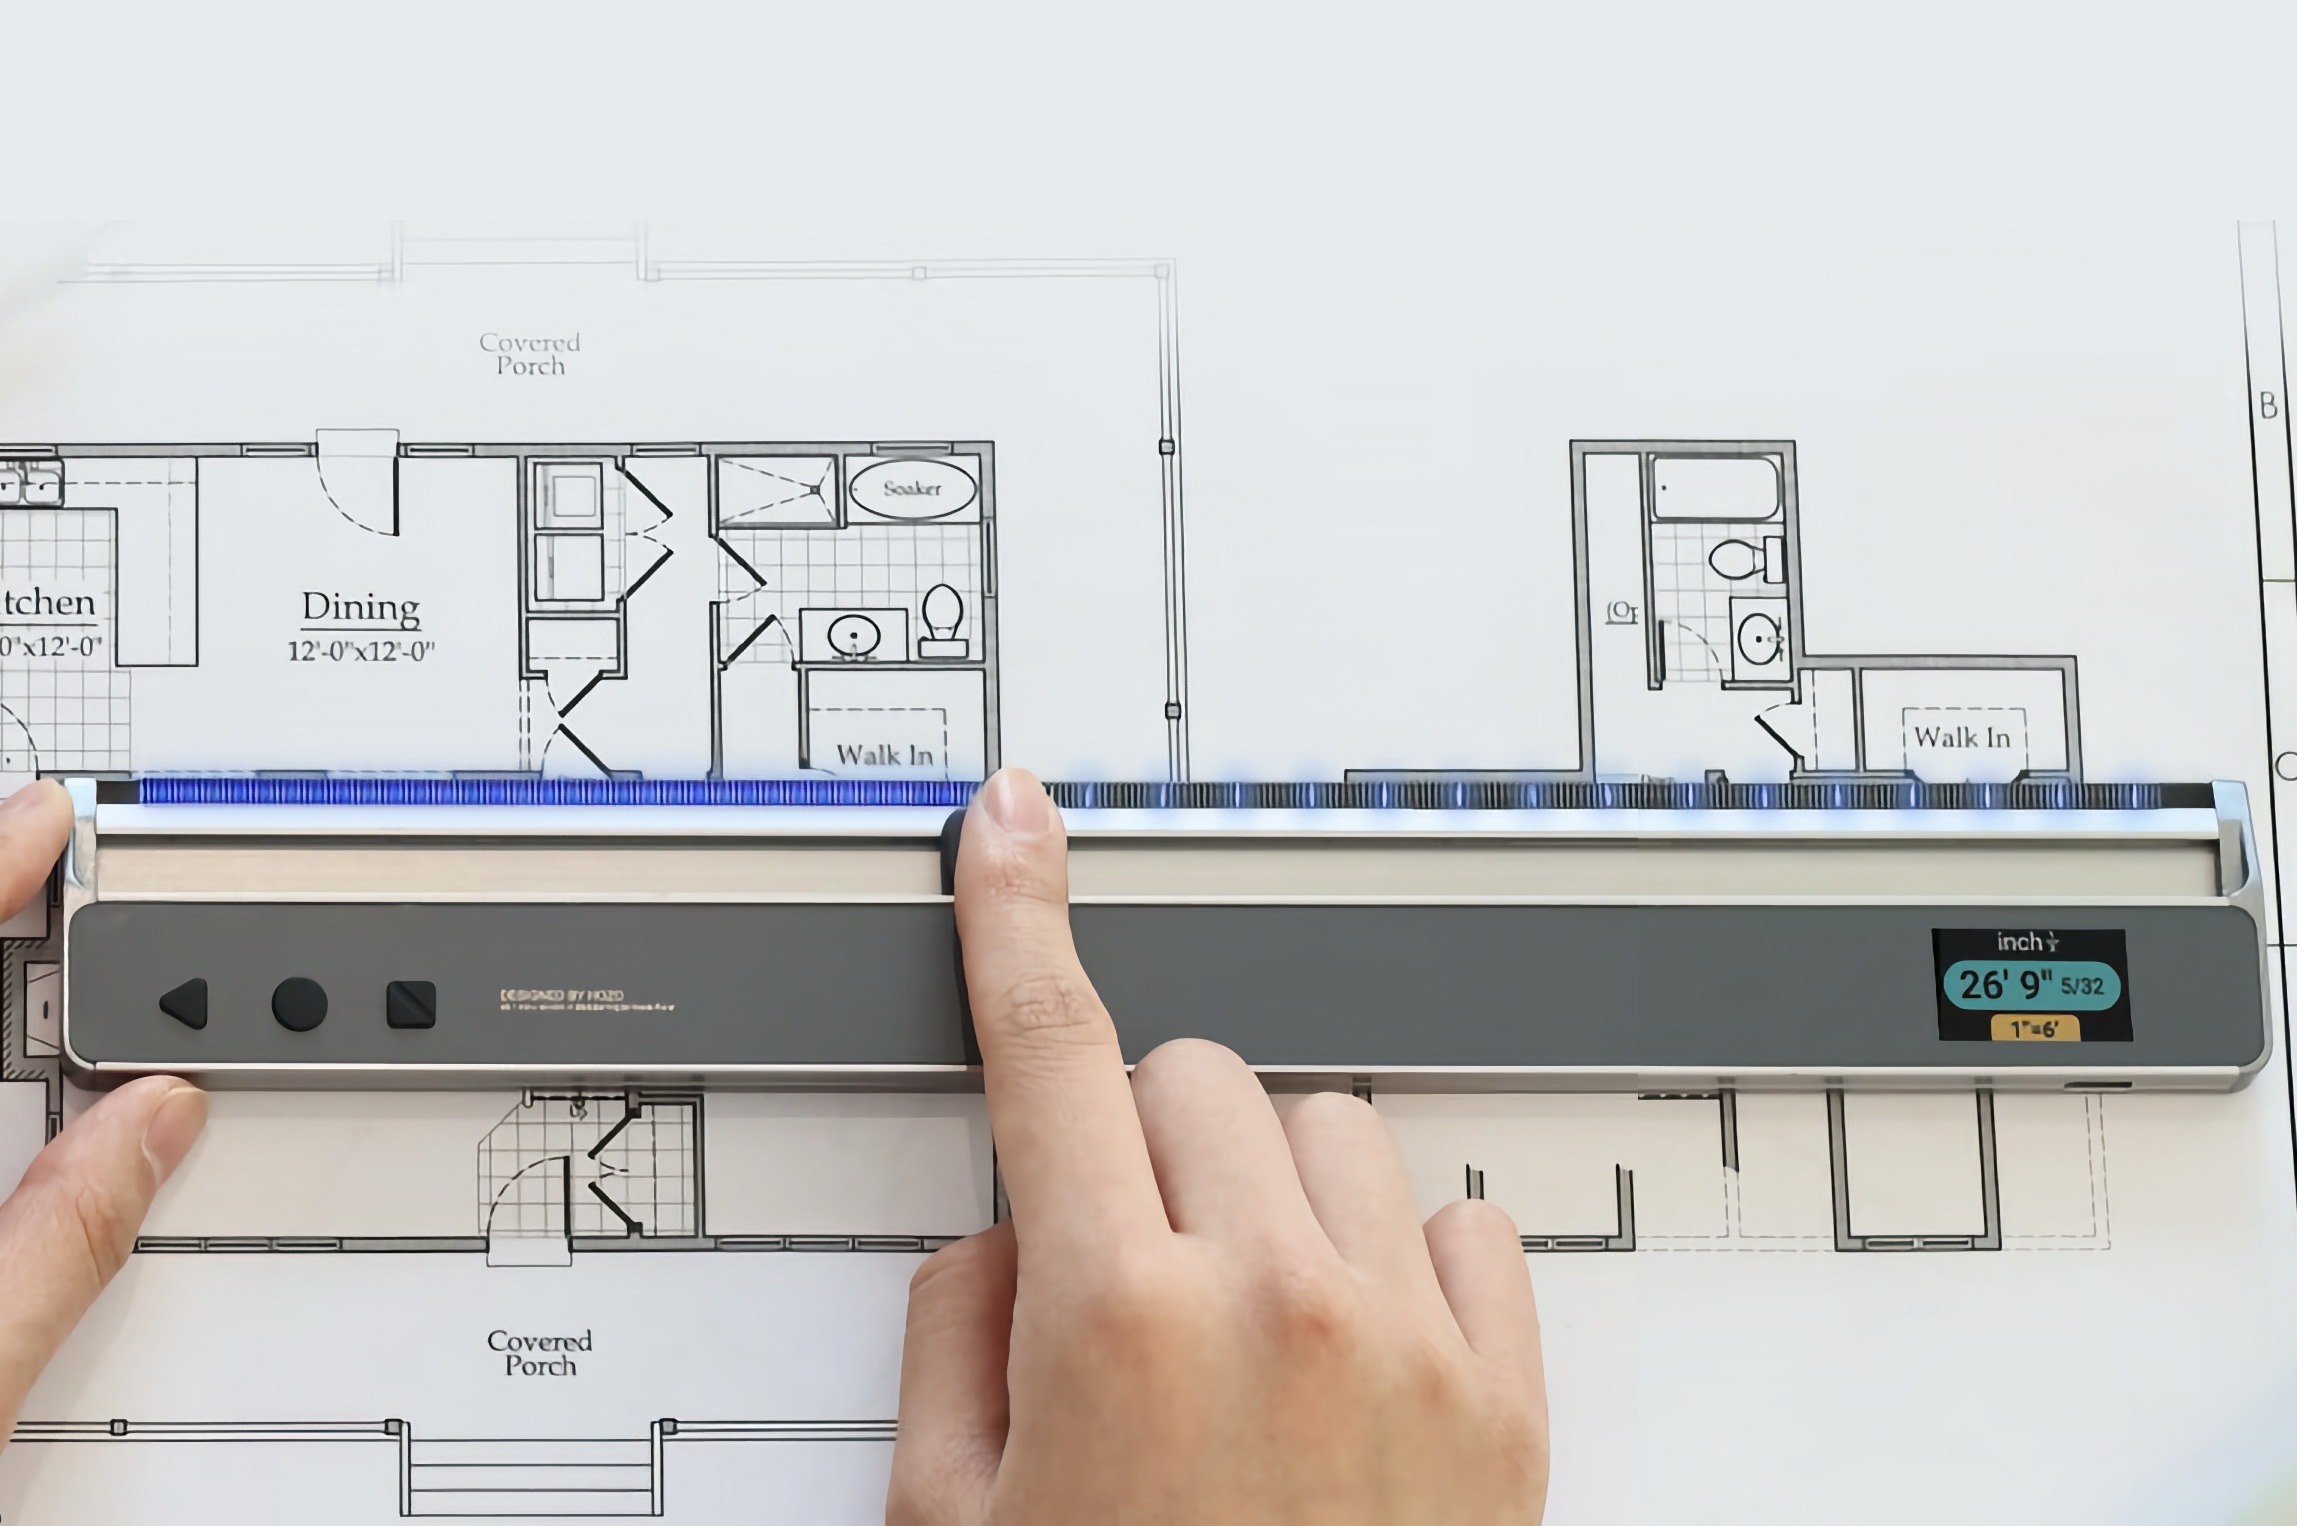 #This modular smart ruler removes the headaches of measuring with different units and scales